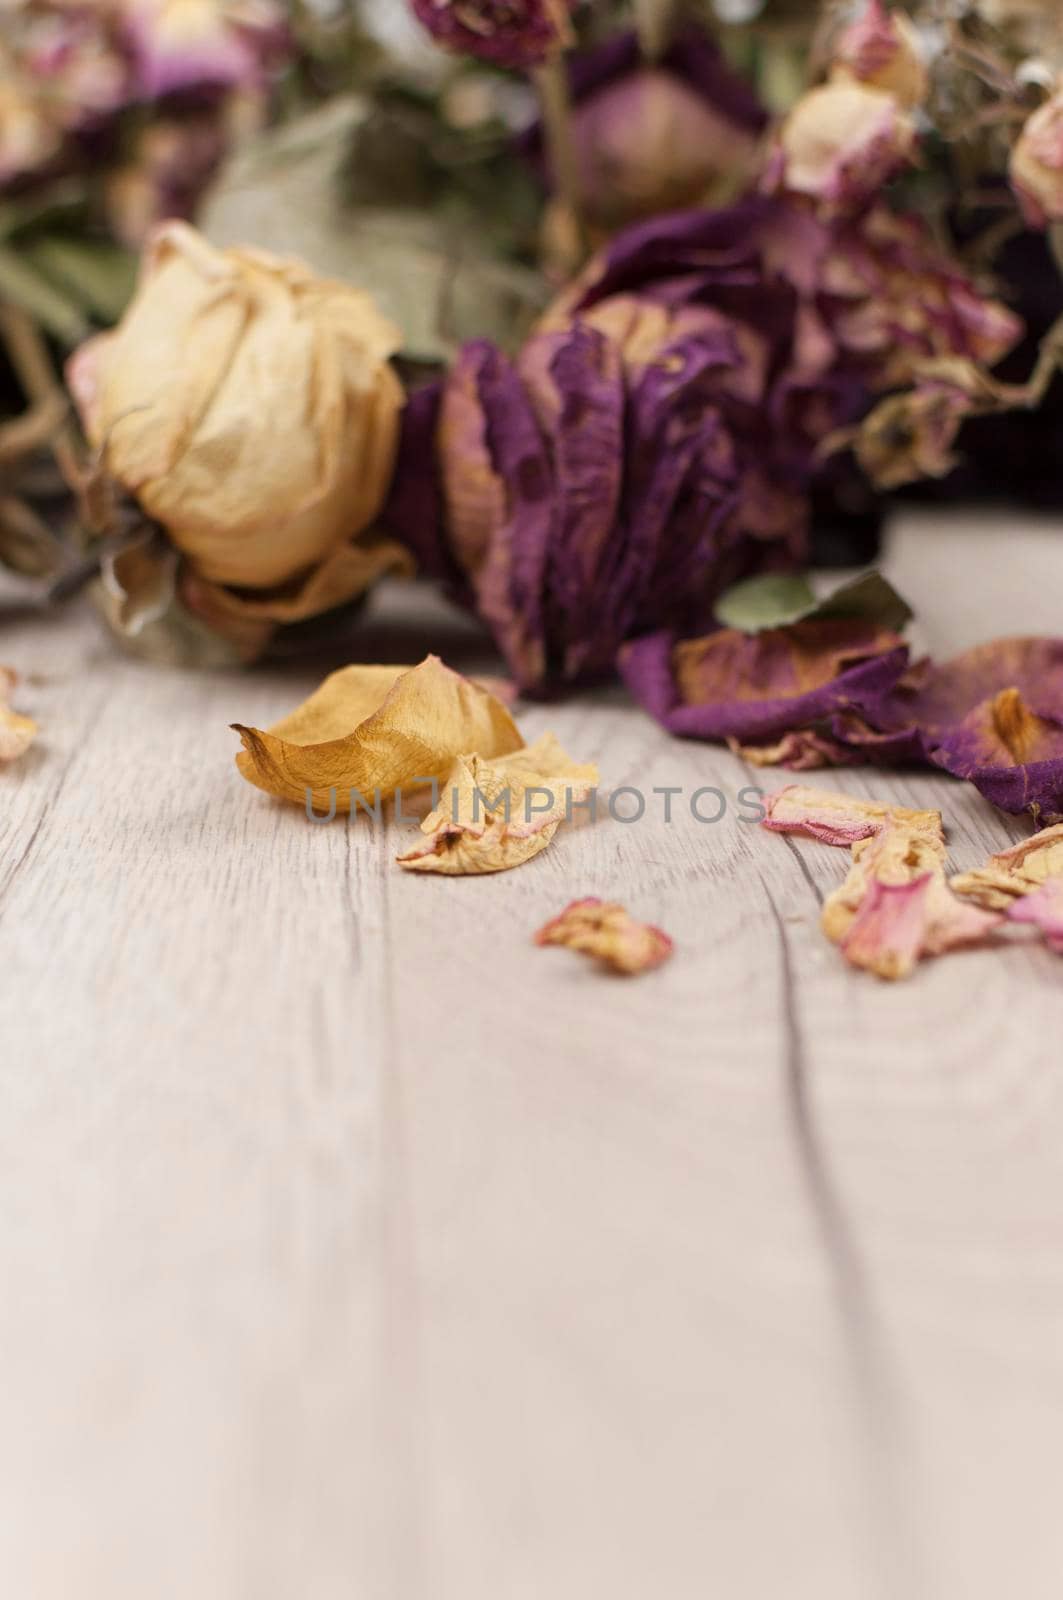 bouquet dried roses on wood background with copy space